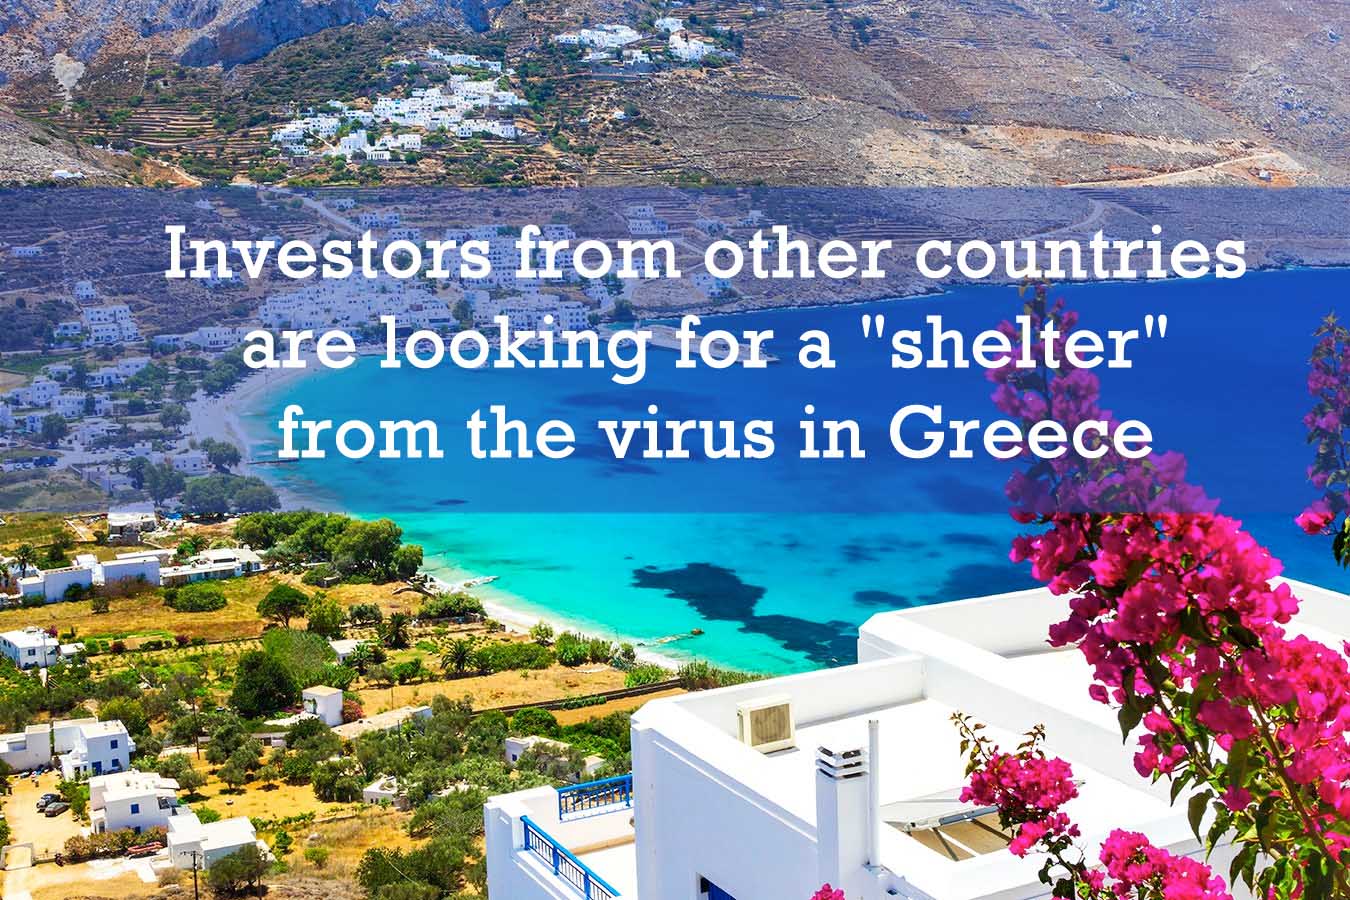 Investors from other countries are looking for a "shelter" from the virus in Greece